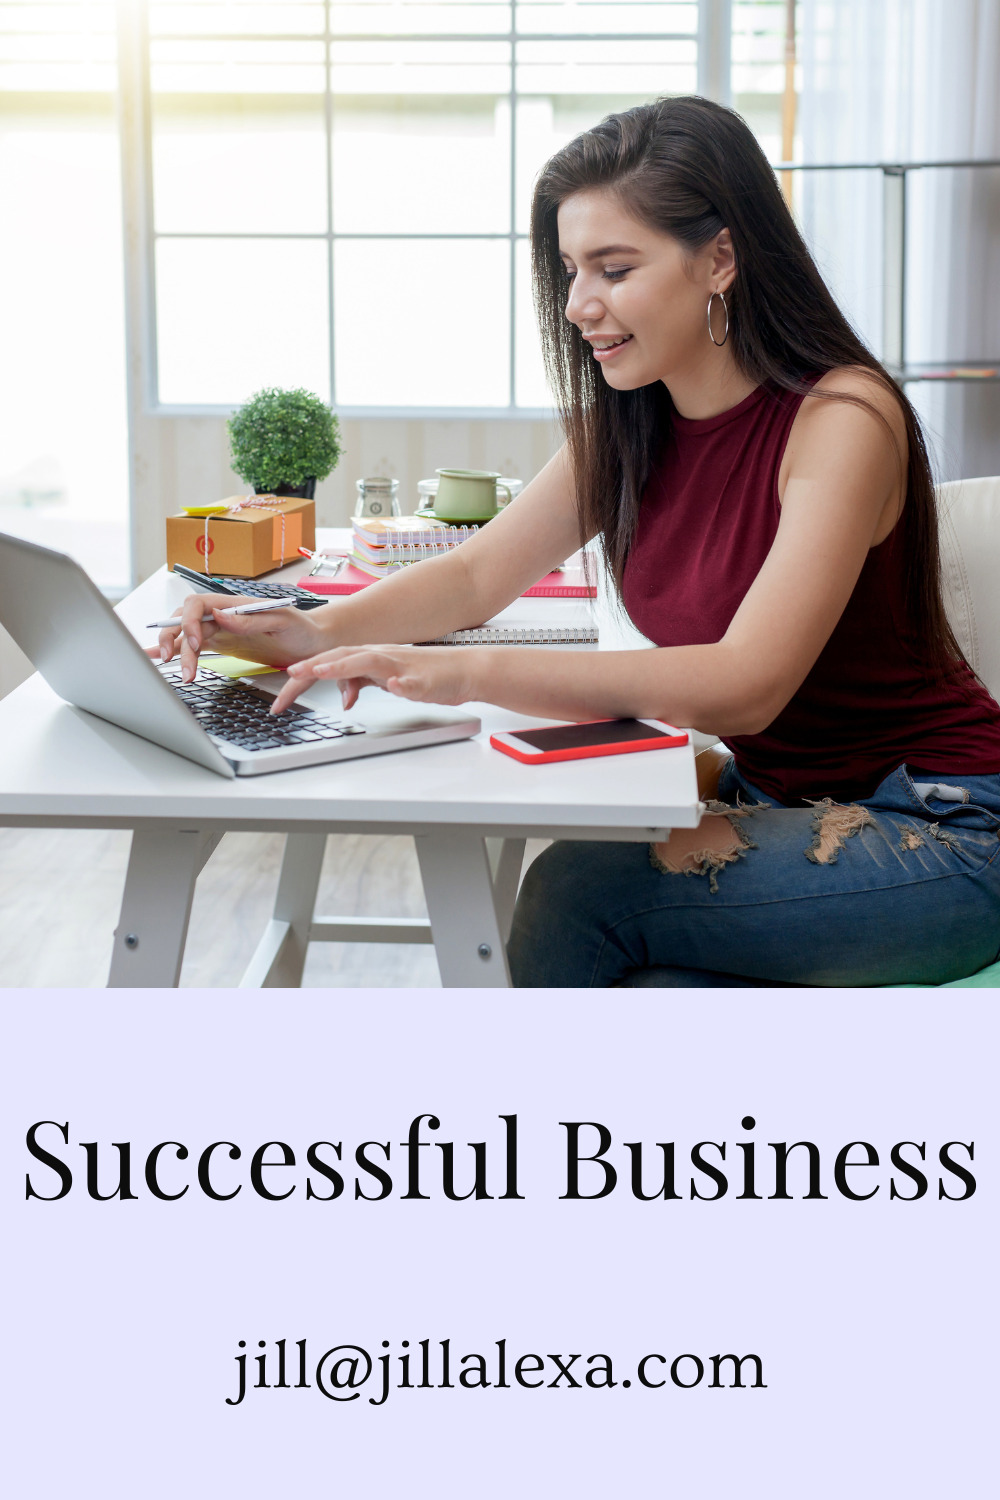 How to build a Successful Business with Little Online Savvy | Successful Business